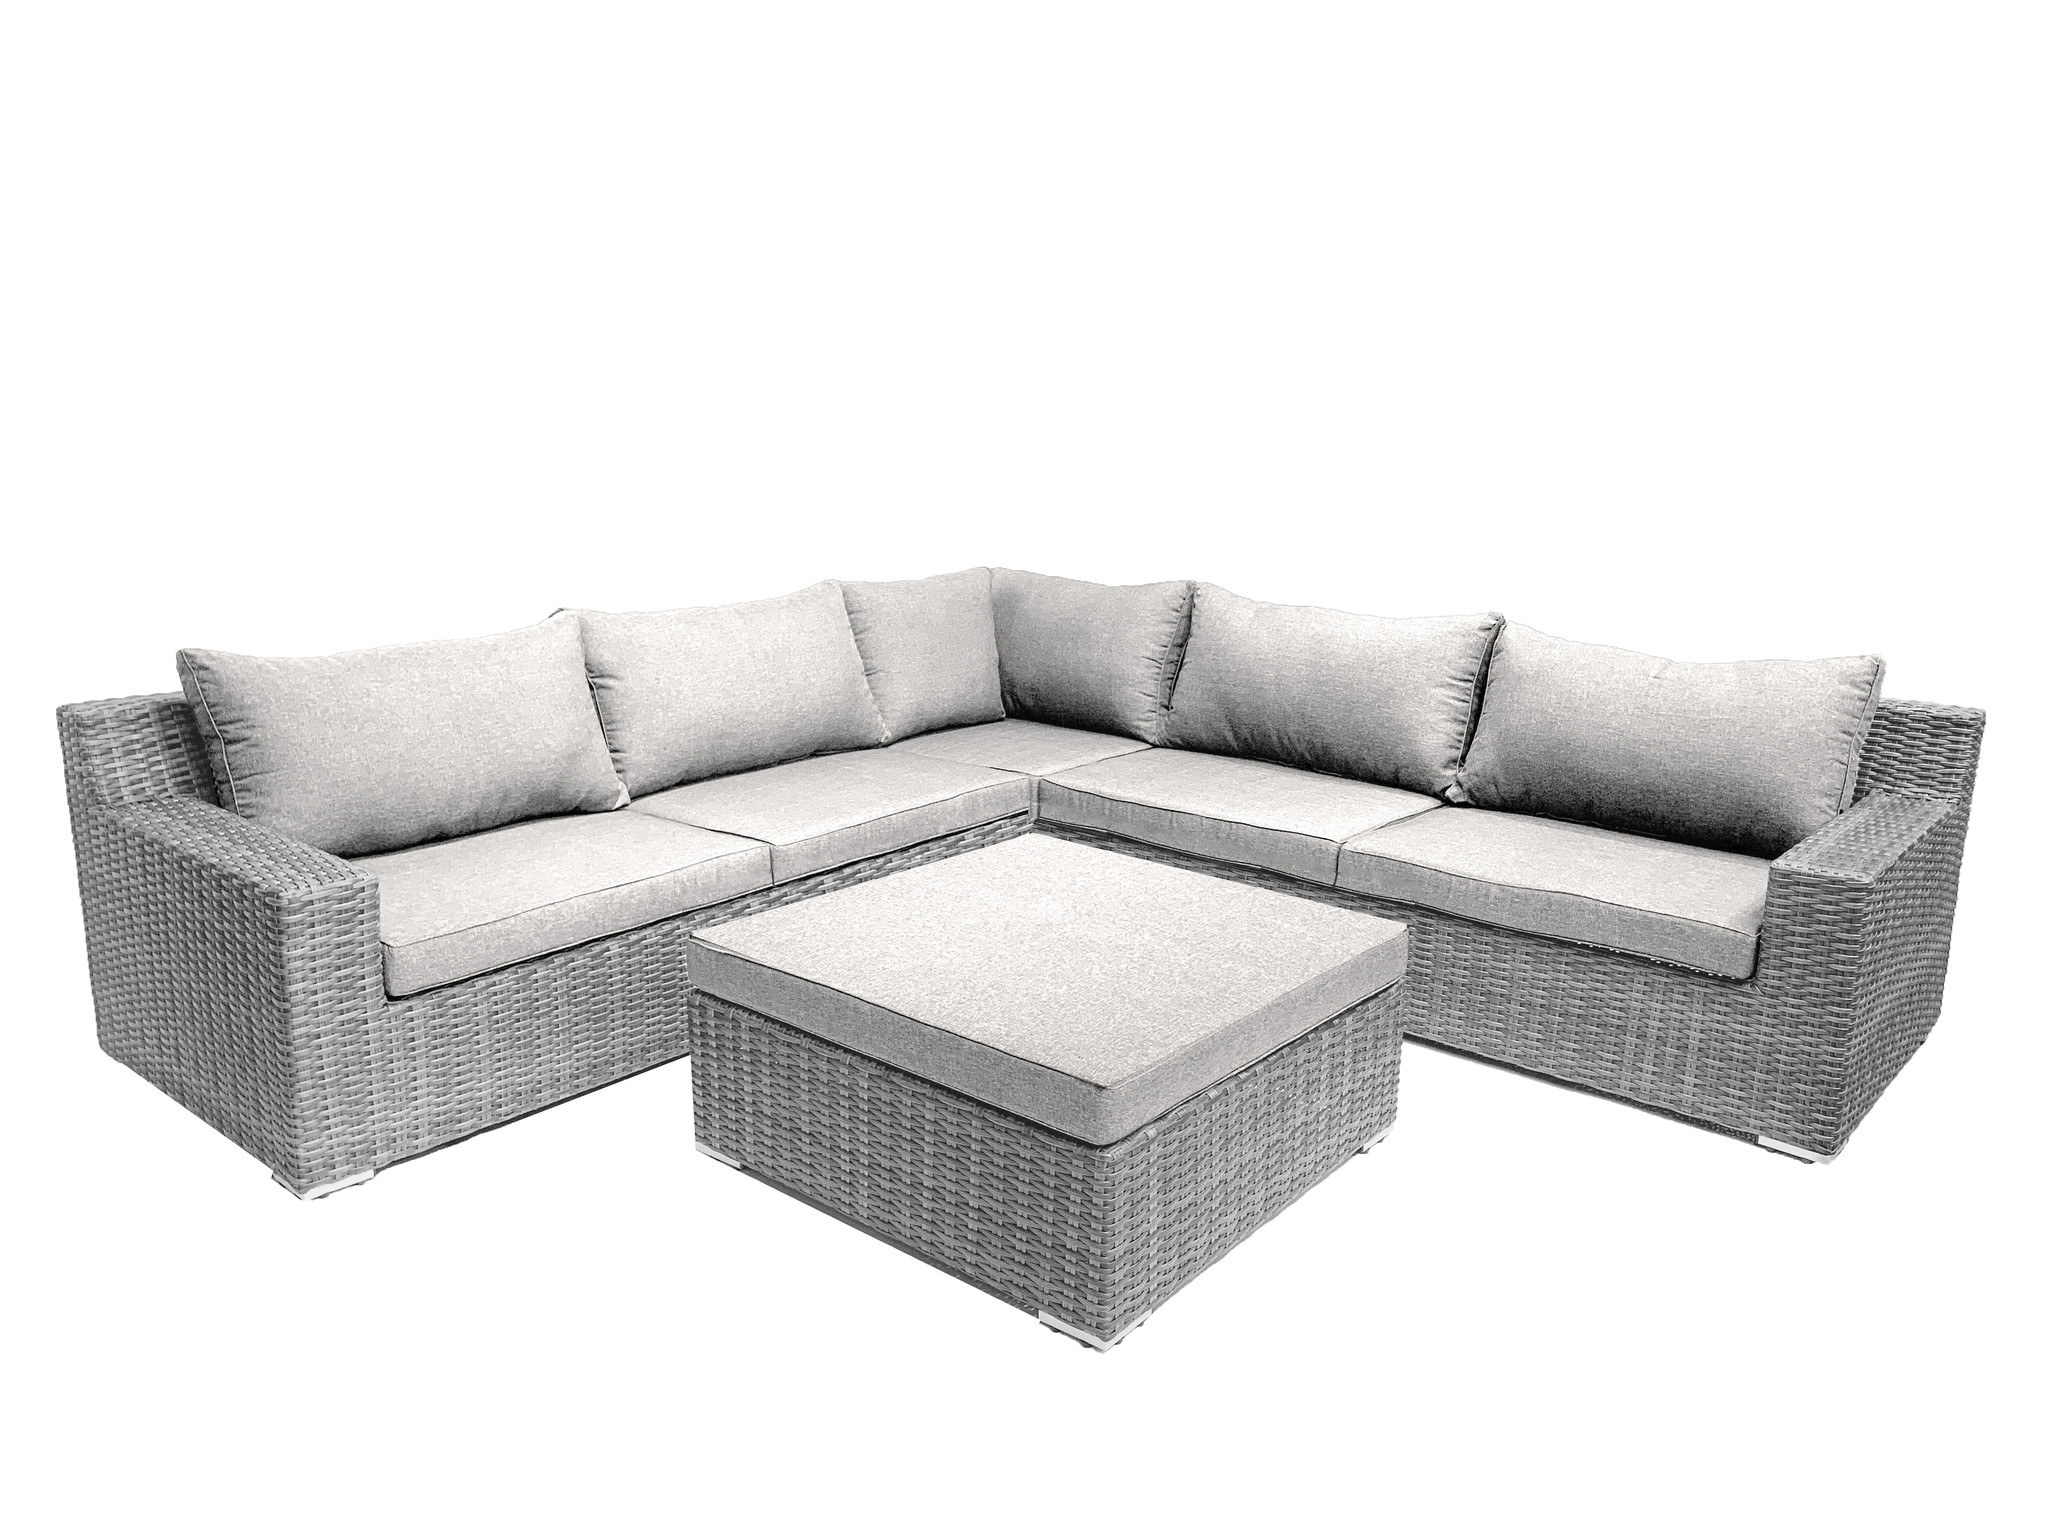 7-person lounge Colorado Blended Gray with beige Garden | Garden Furniture Yellow Webshop